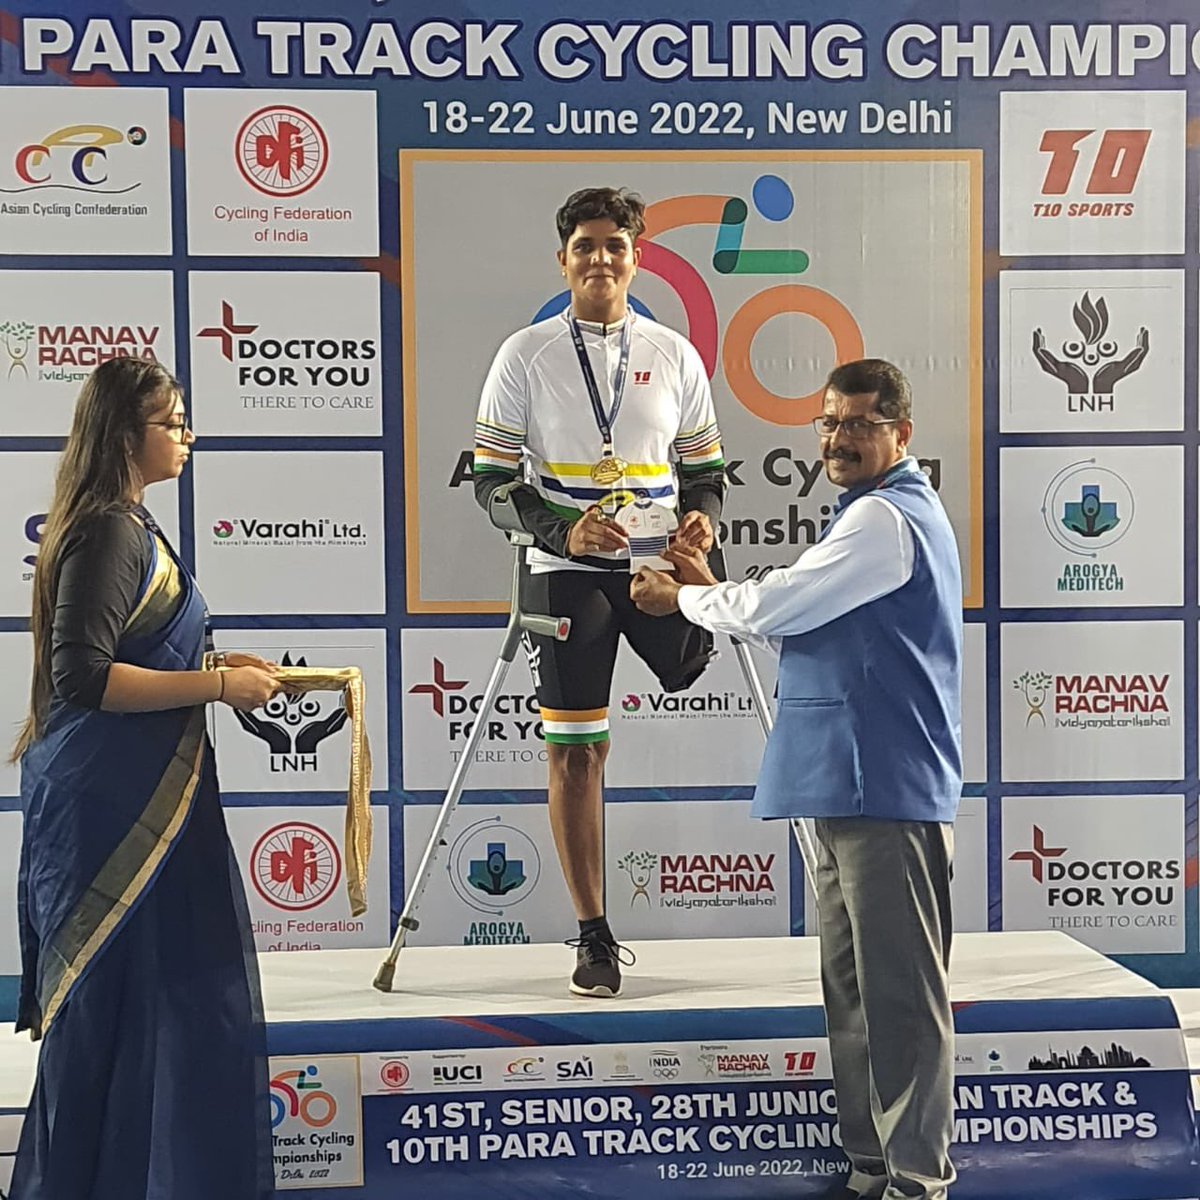 Team AMF Para cyclists won medals. Jyoti Gaderiya (C2 Category) clinched Gold and Arshad Shaik (Mens C2 Category) bagged Bronze in the 10th Para Track Asian Cycling. Thank you @OfficialCFI , @Media_SAI and Mudhra Trust.